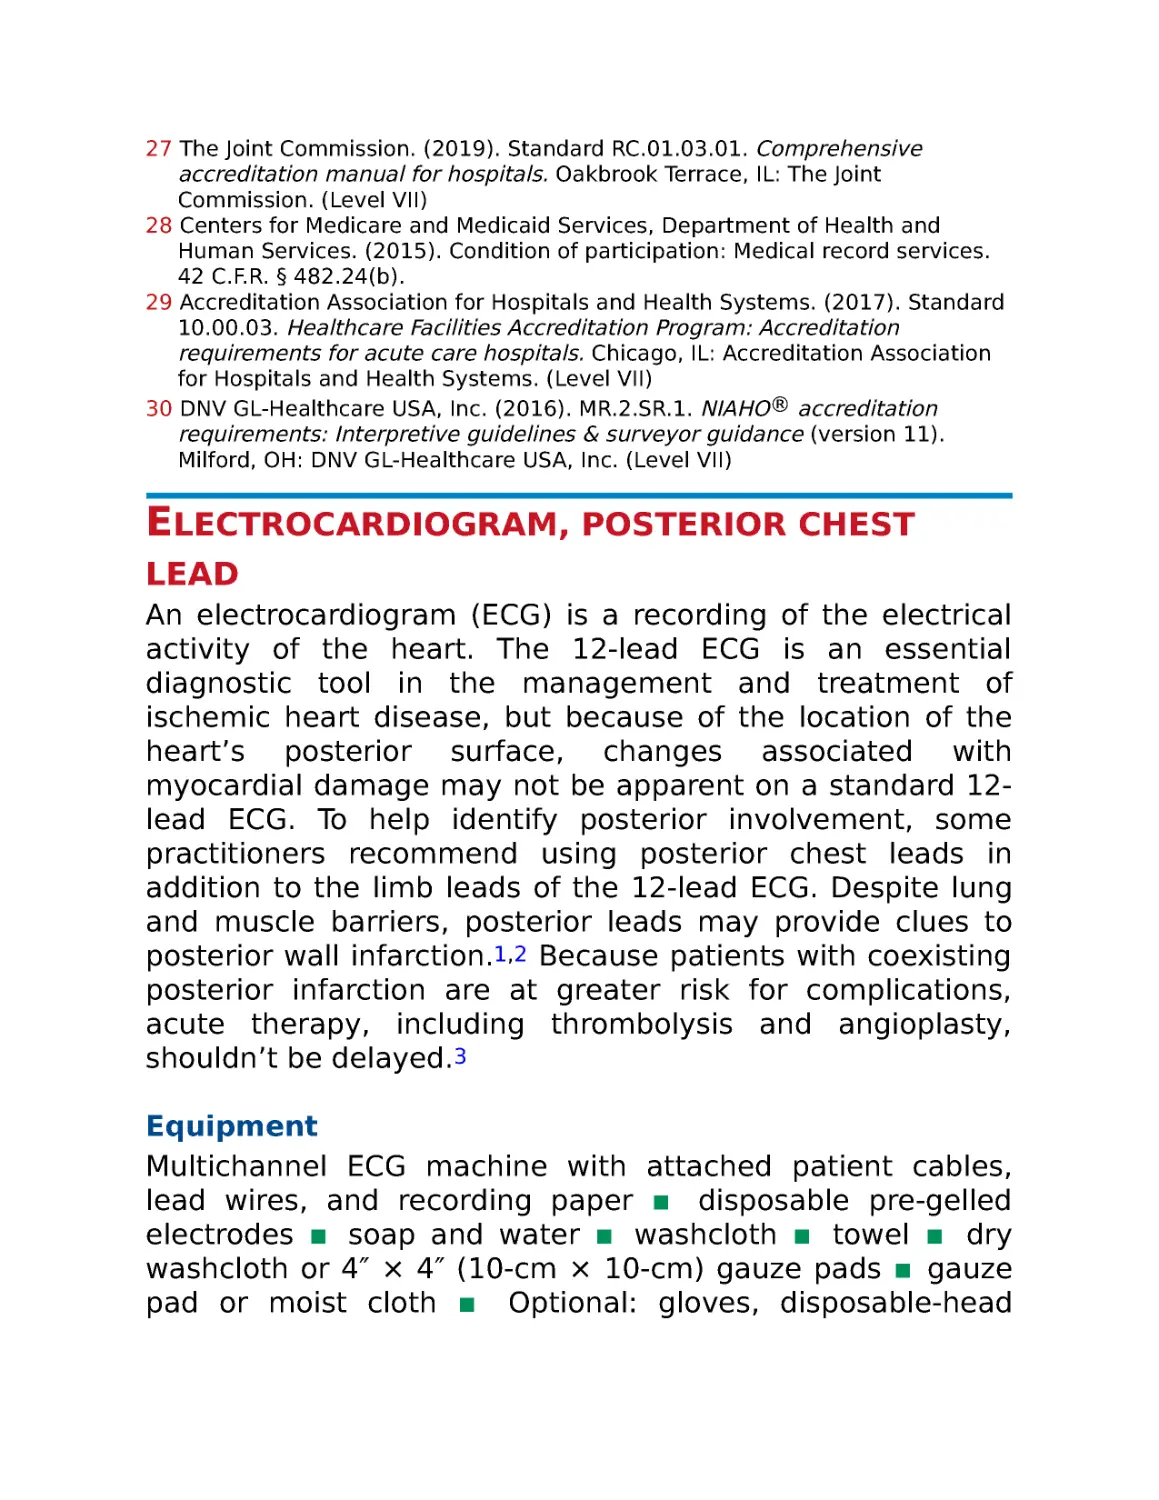 Electrocardiogram, posterior chest lead